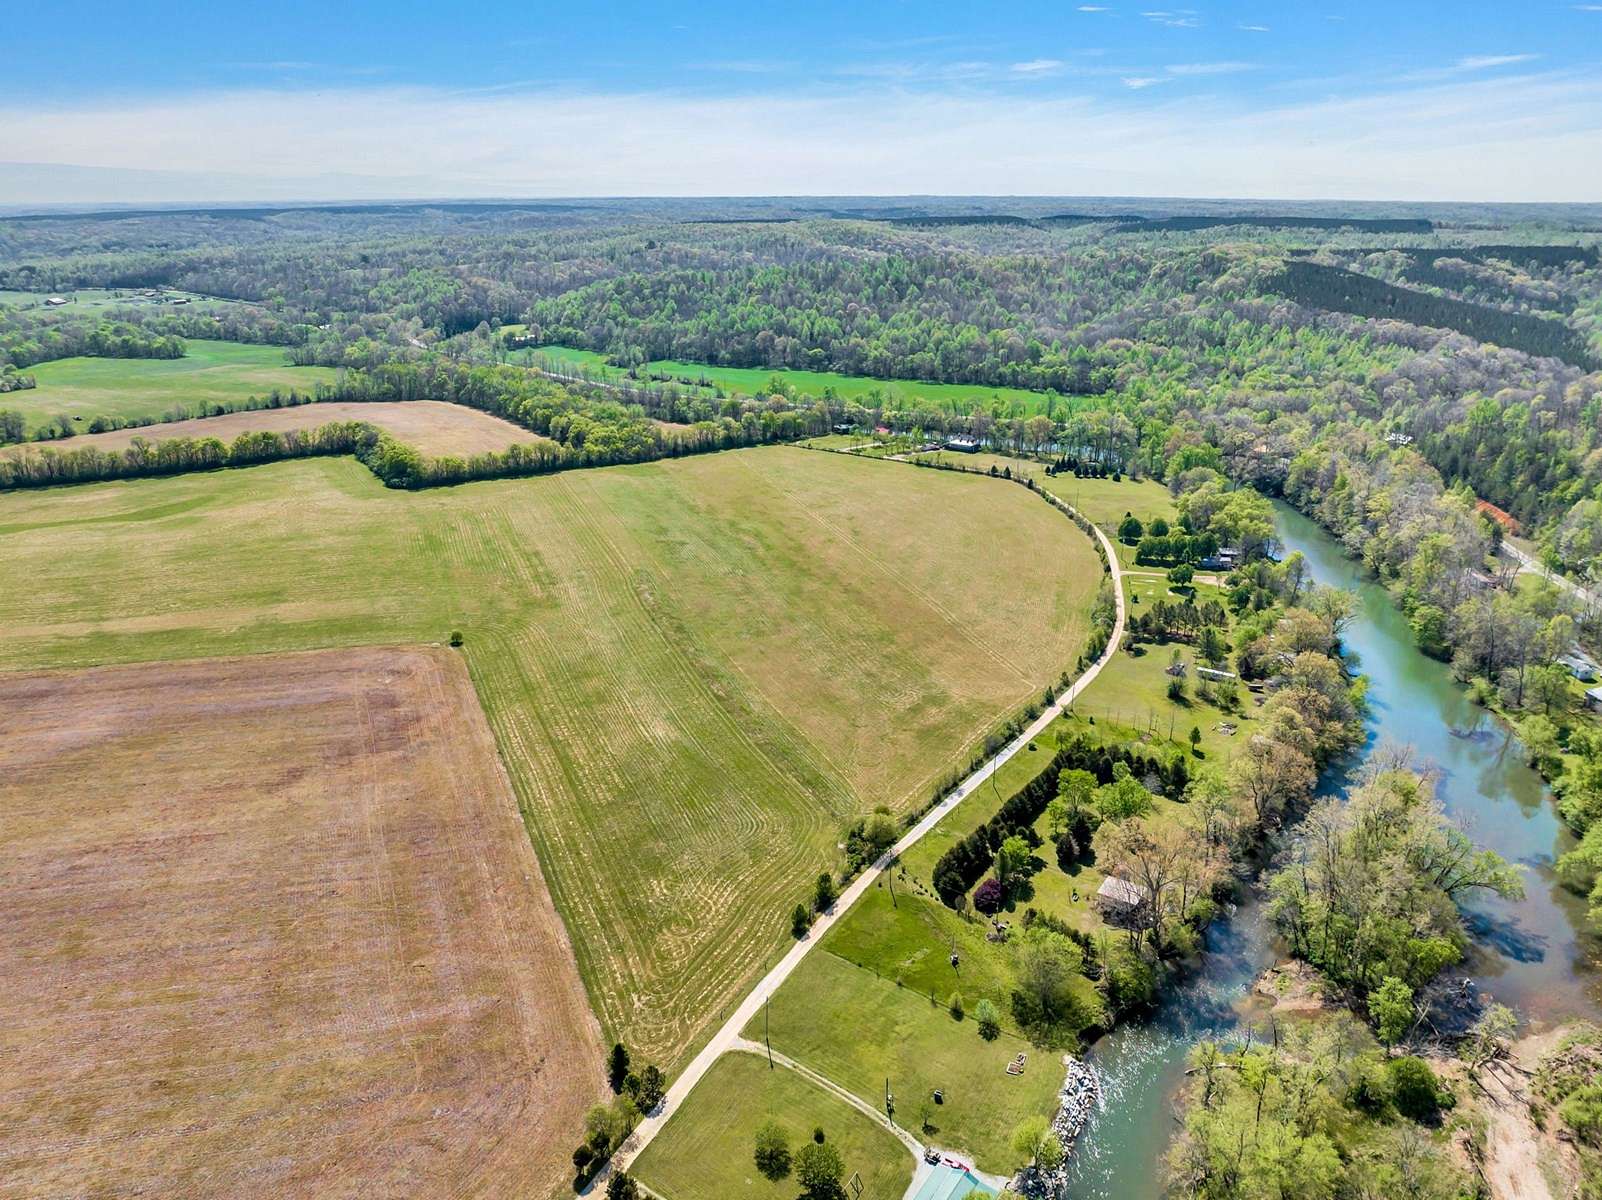 0.26 Acres of Land for Sale in Hohenwald, Tennessee